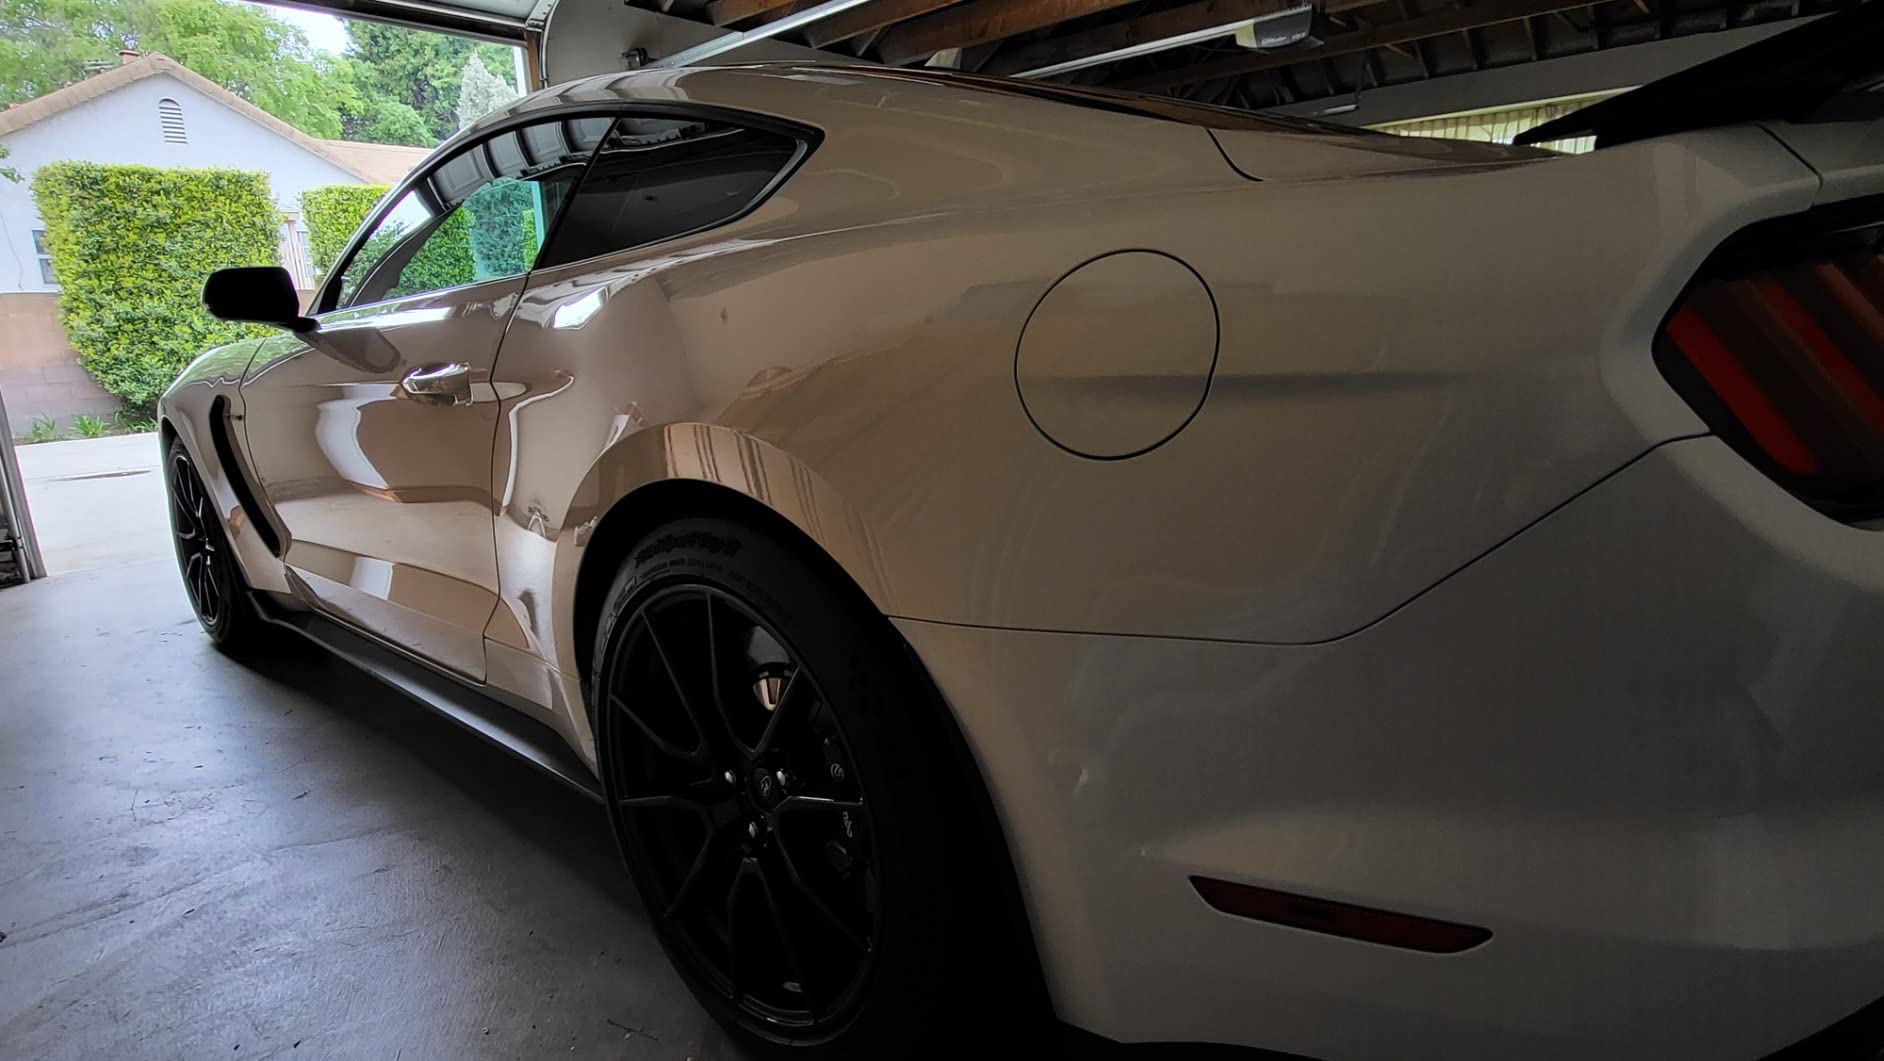 Ford Mustang looking shiny after receiving a ceramic coating